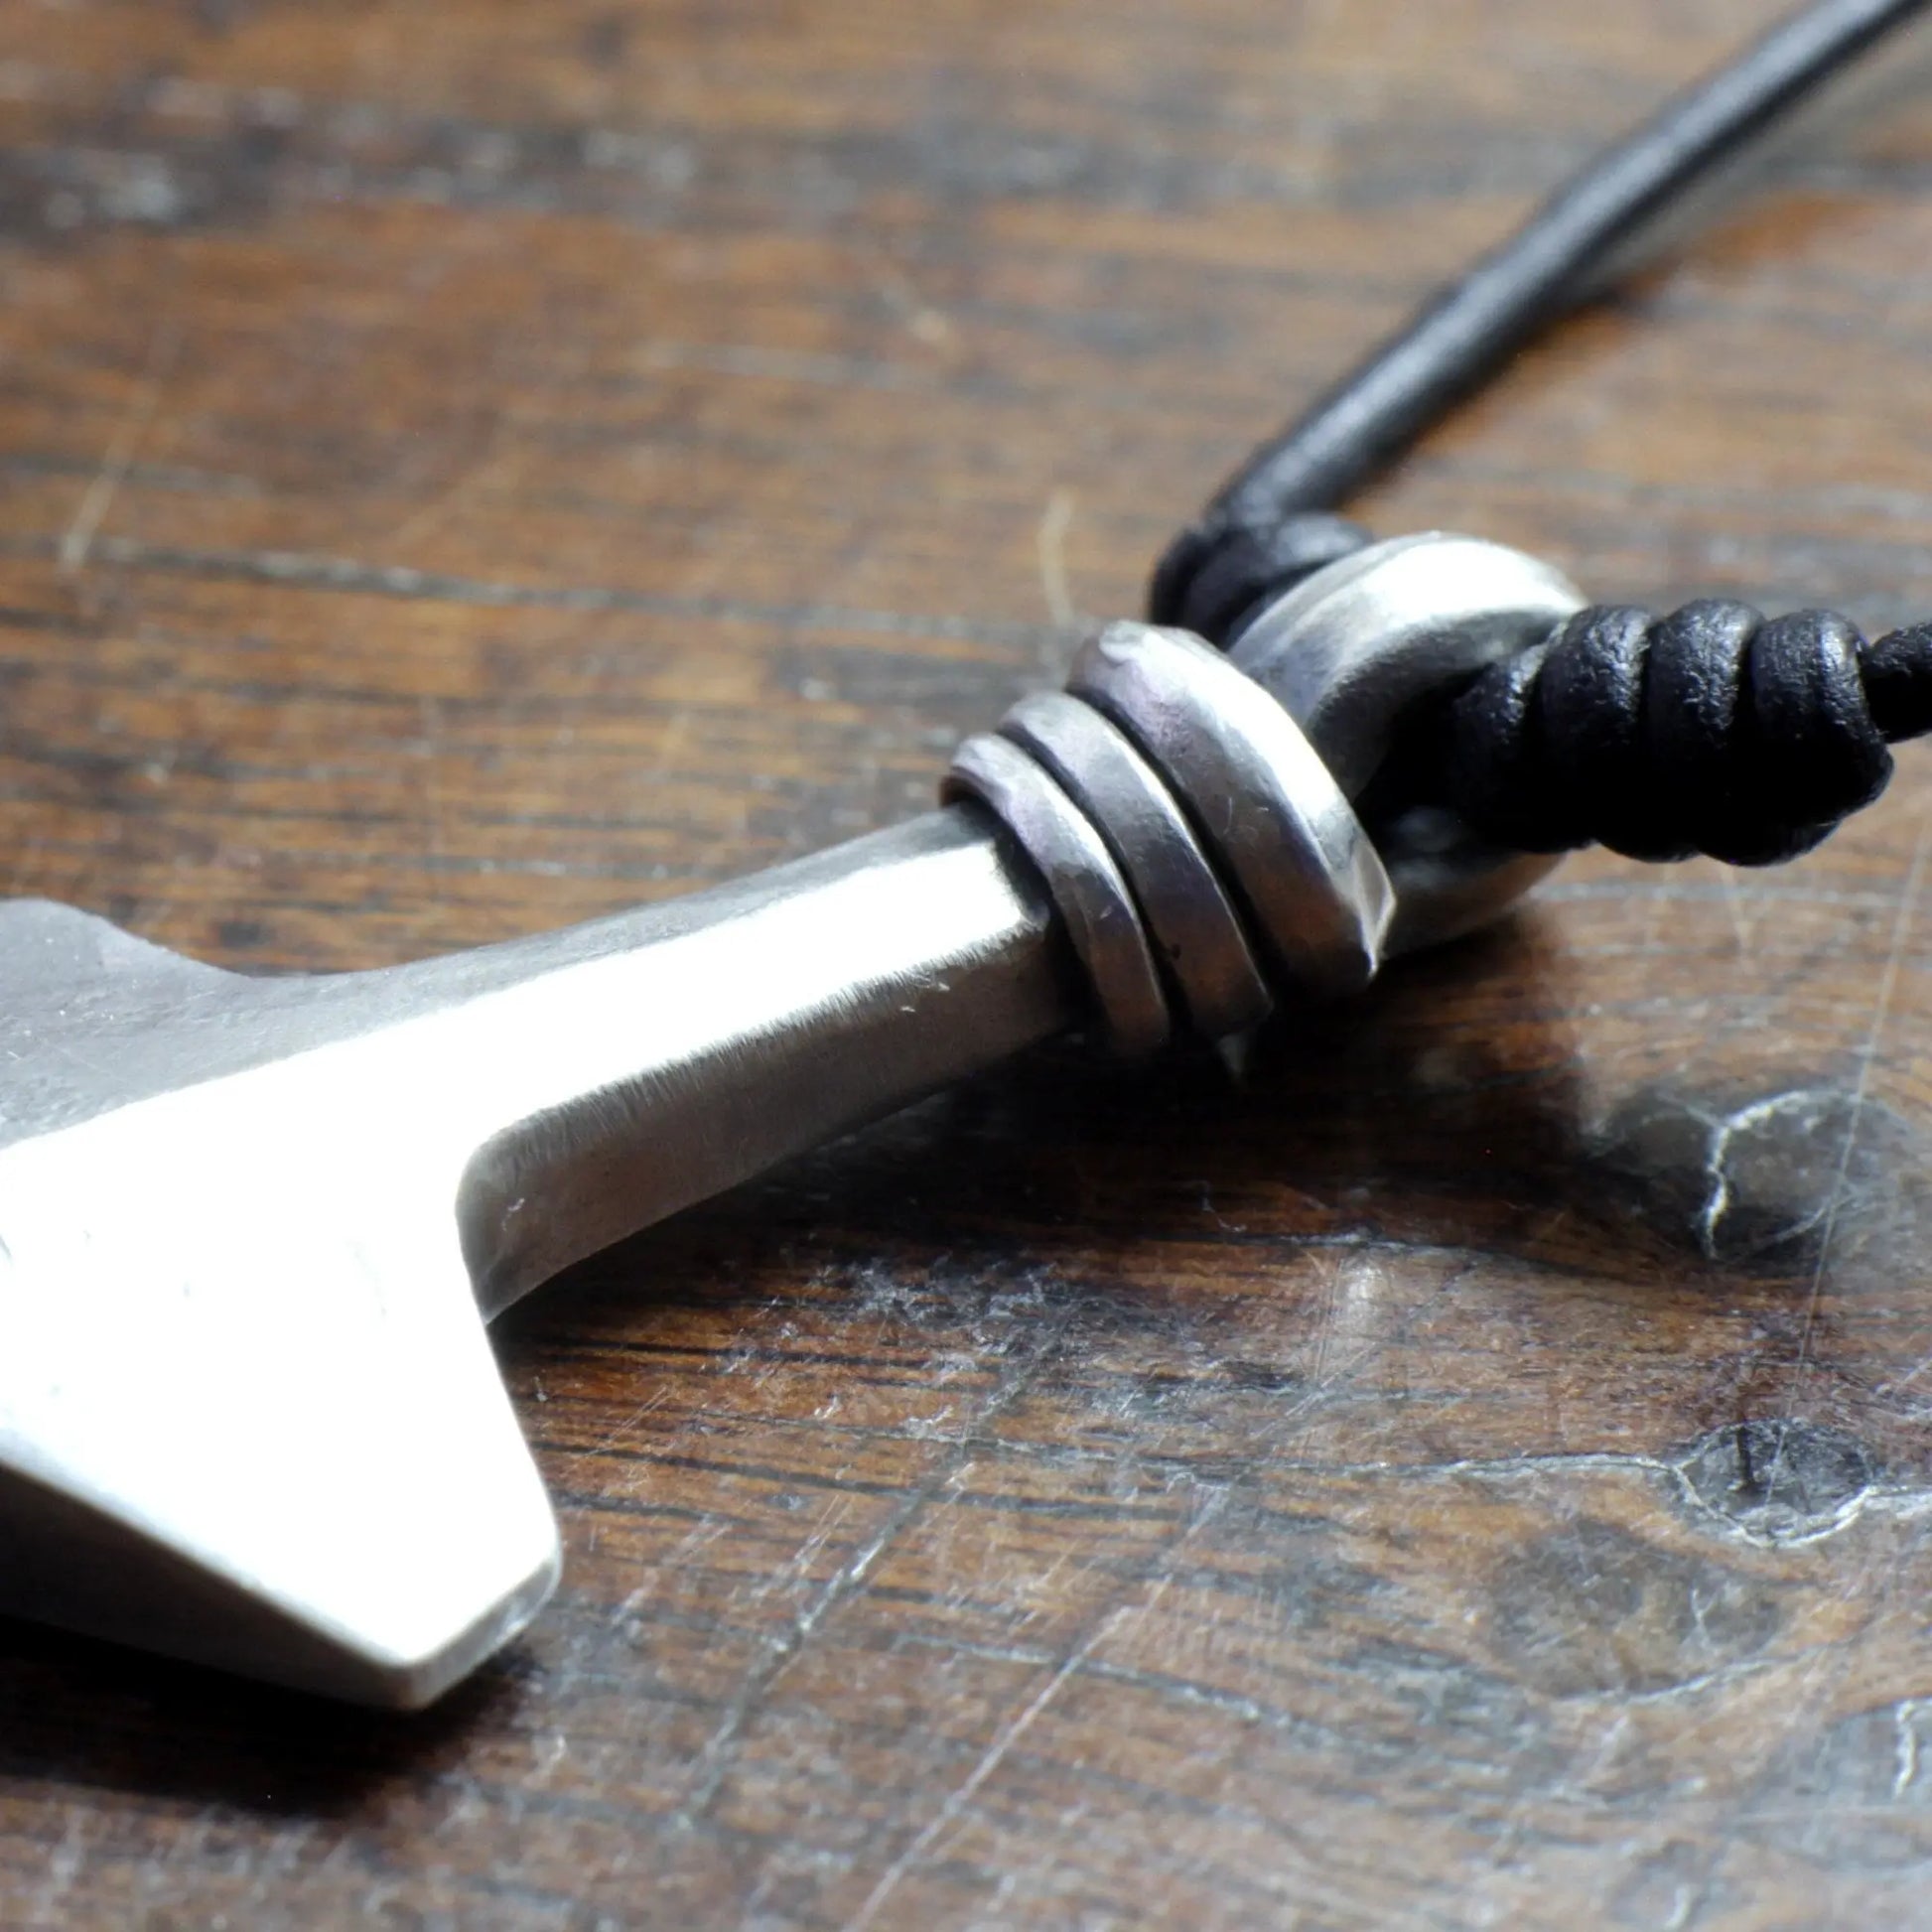 Small Contemporary Forged Silver Thor's Hammer